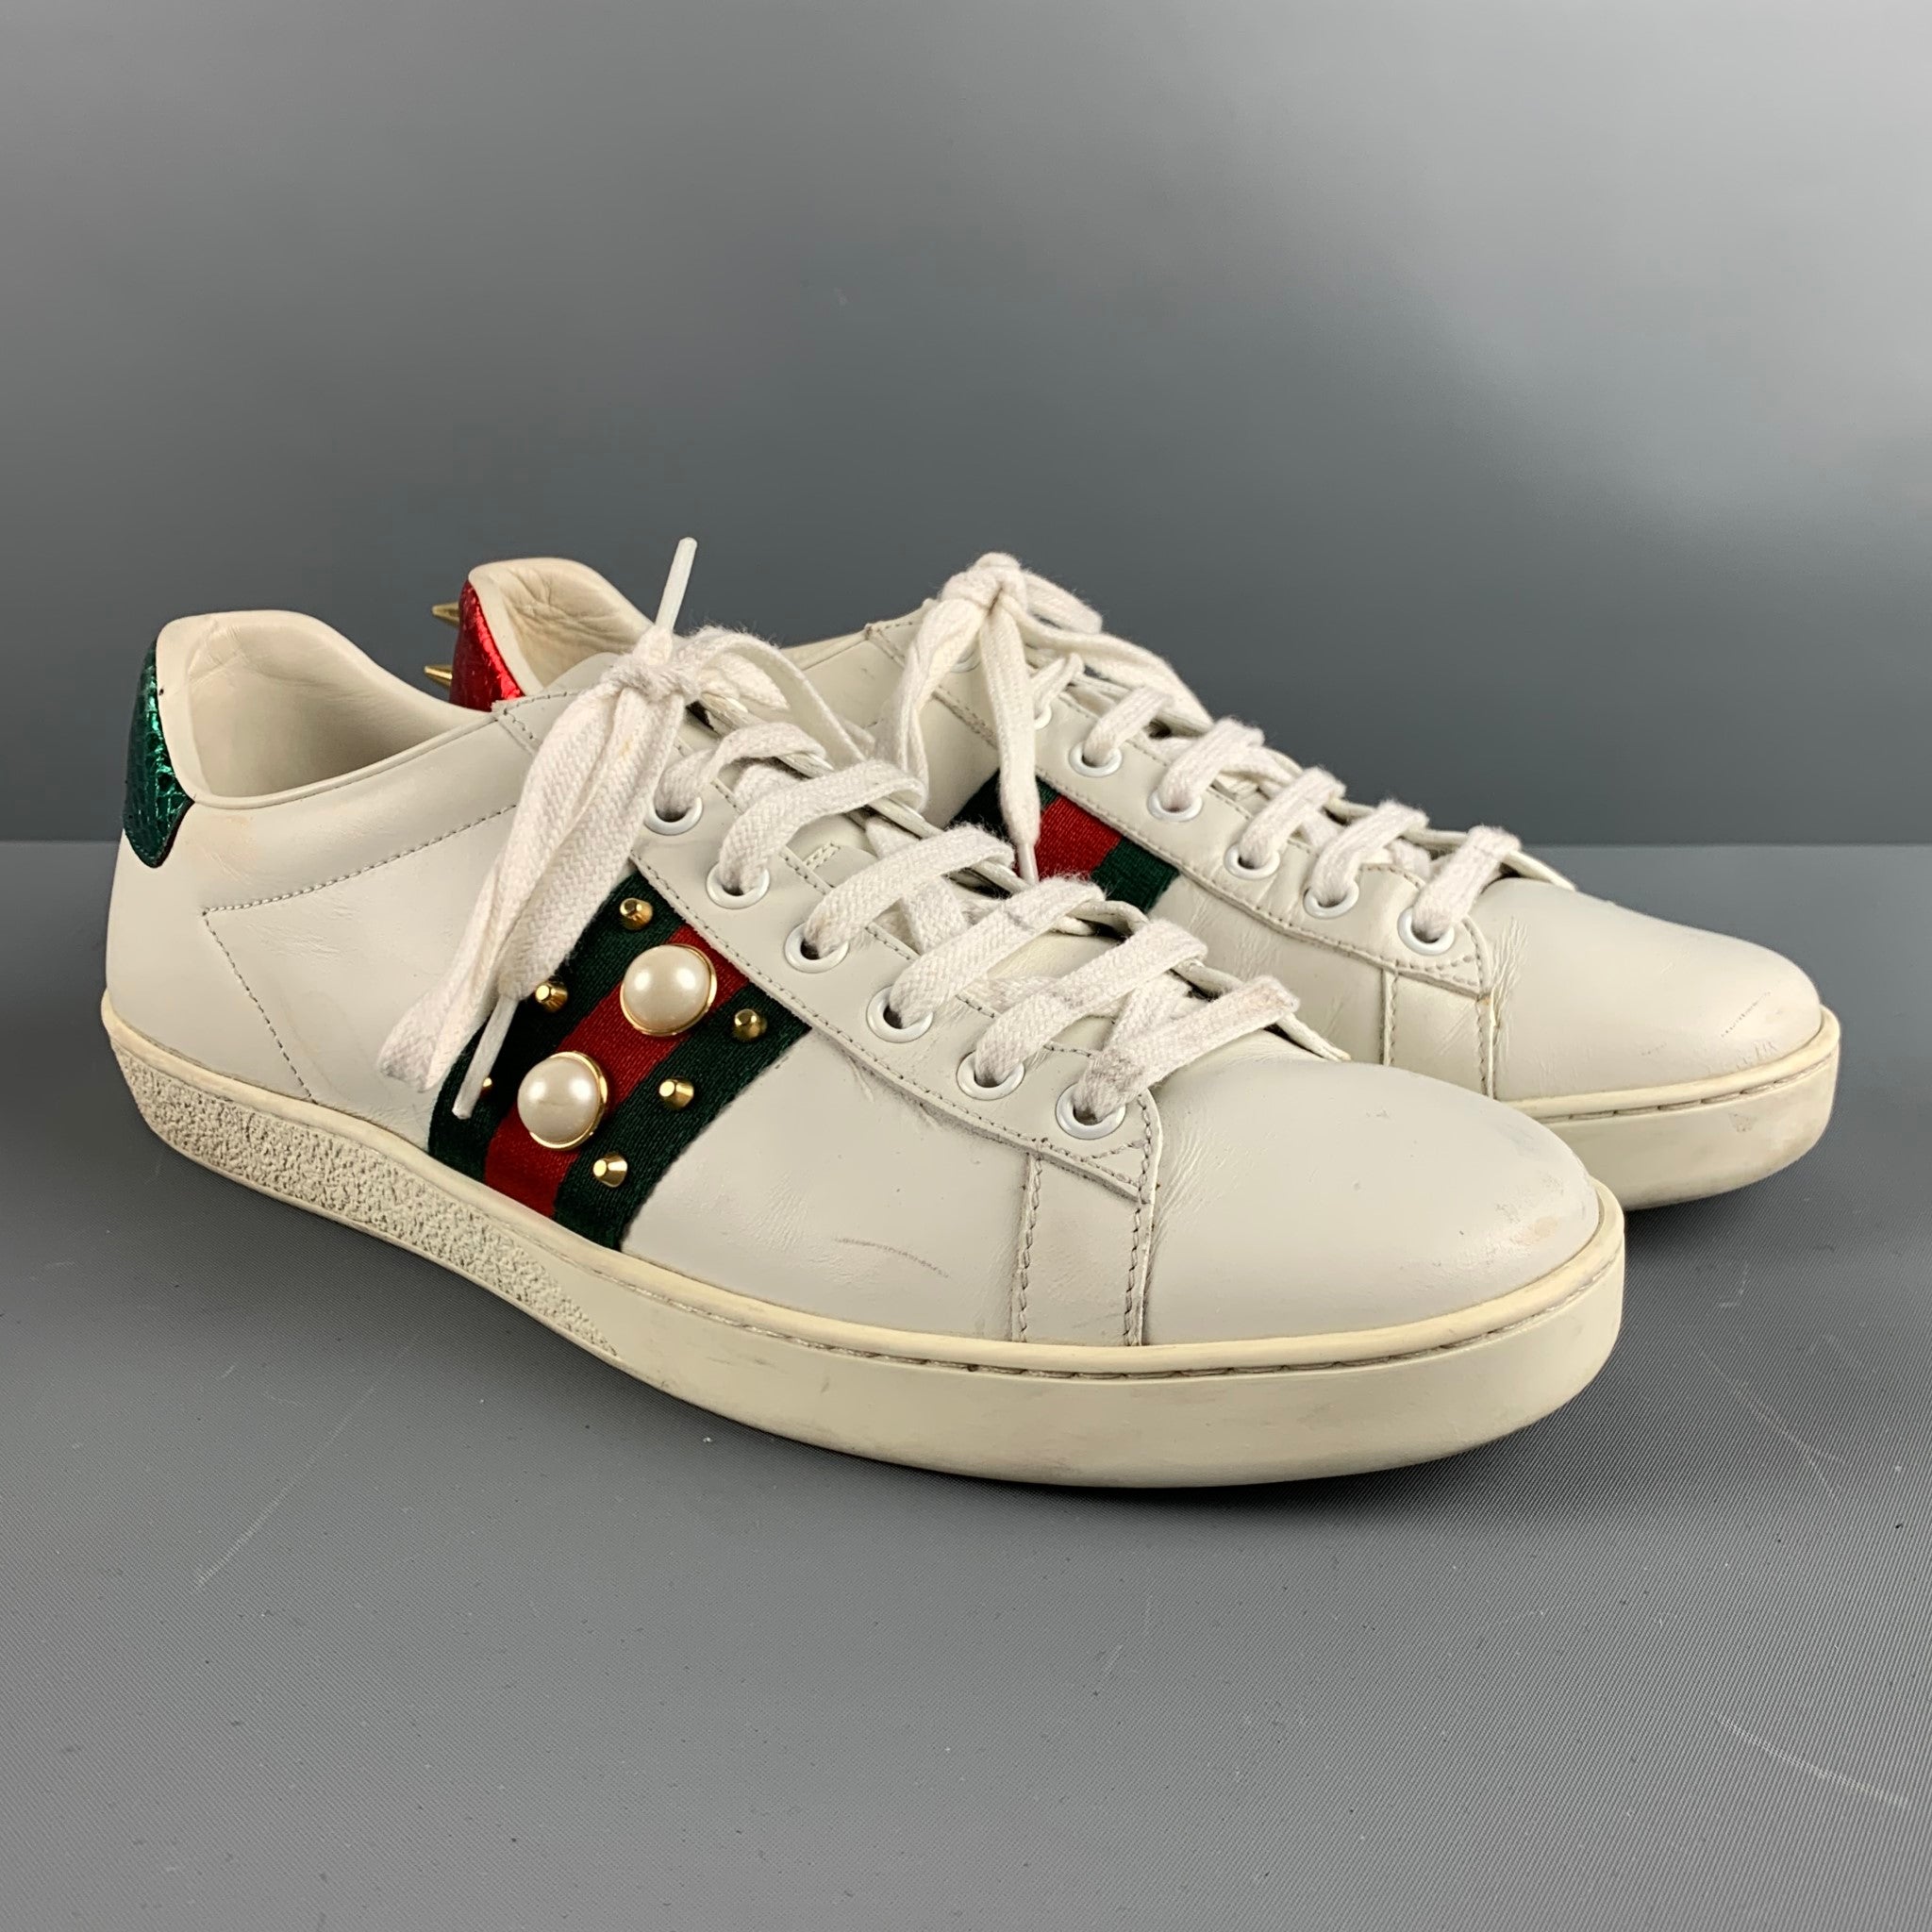 Gucci Basket Sneaker Throws It Back to the '90s | Hypebeast